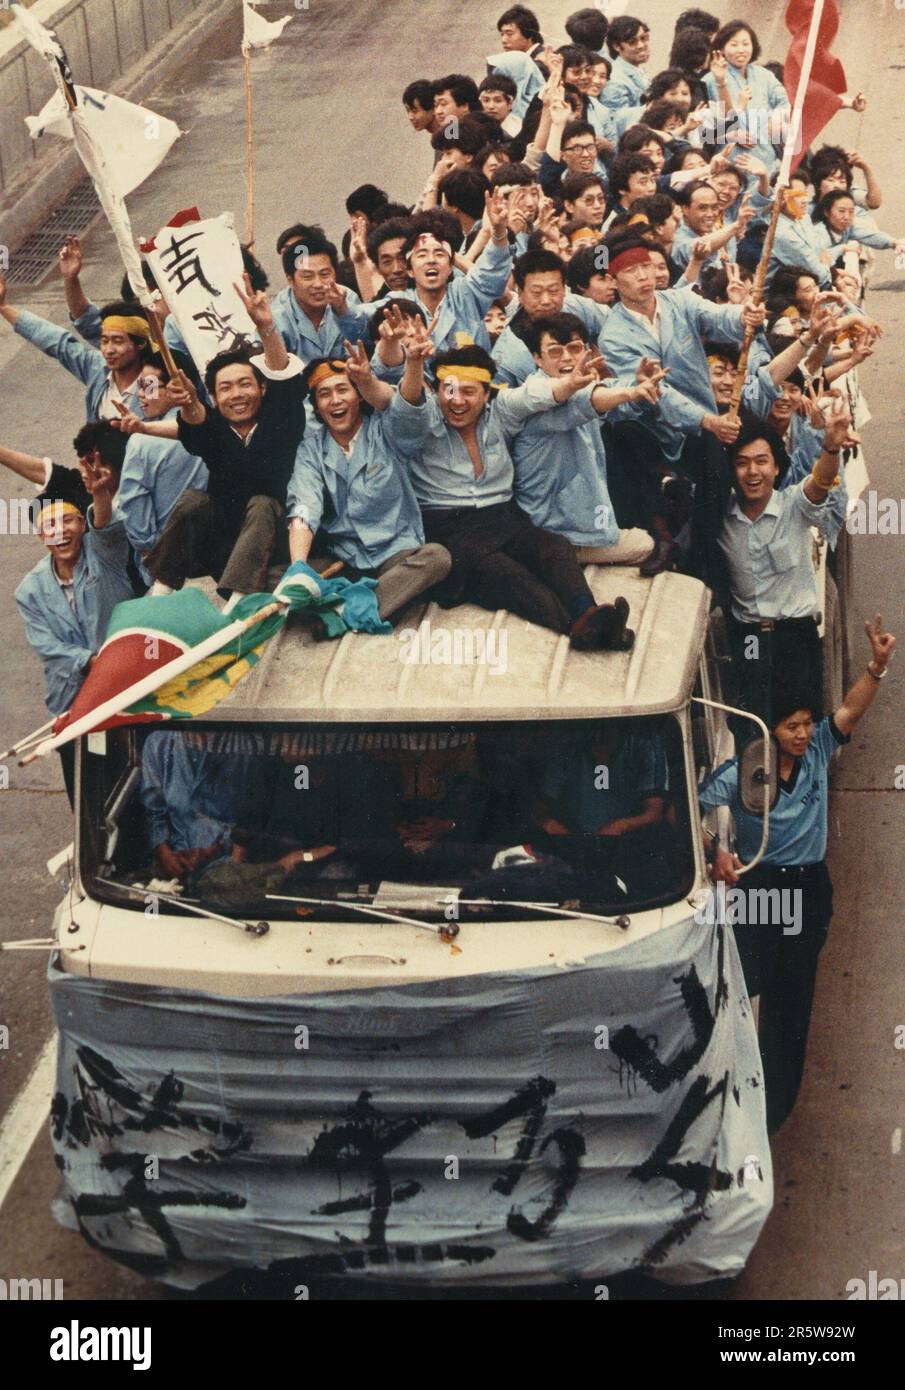 Chinese workers supporting pro-democracy student protesters on Tiananmen Square ride through the streets of Beijing on May 18, 1989. Stock Photo